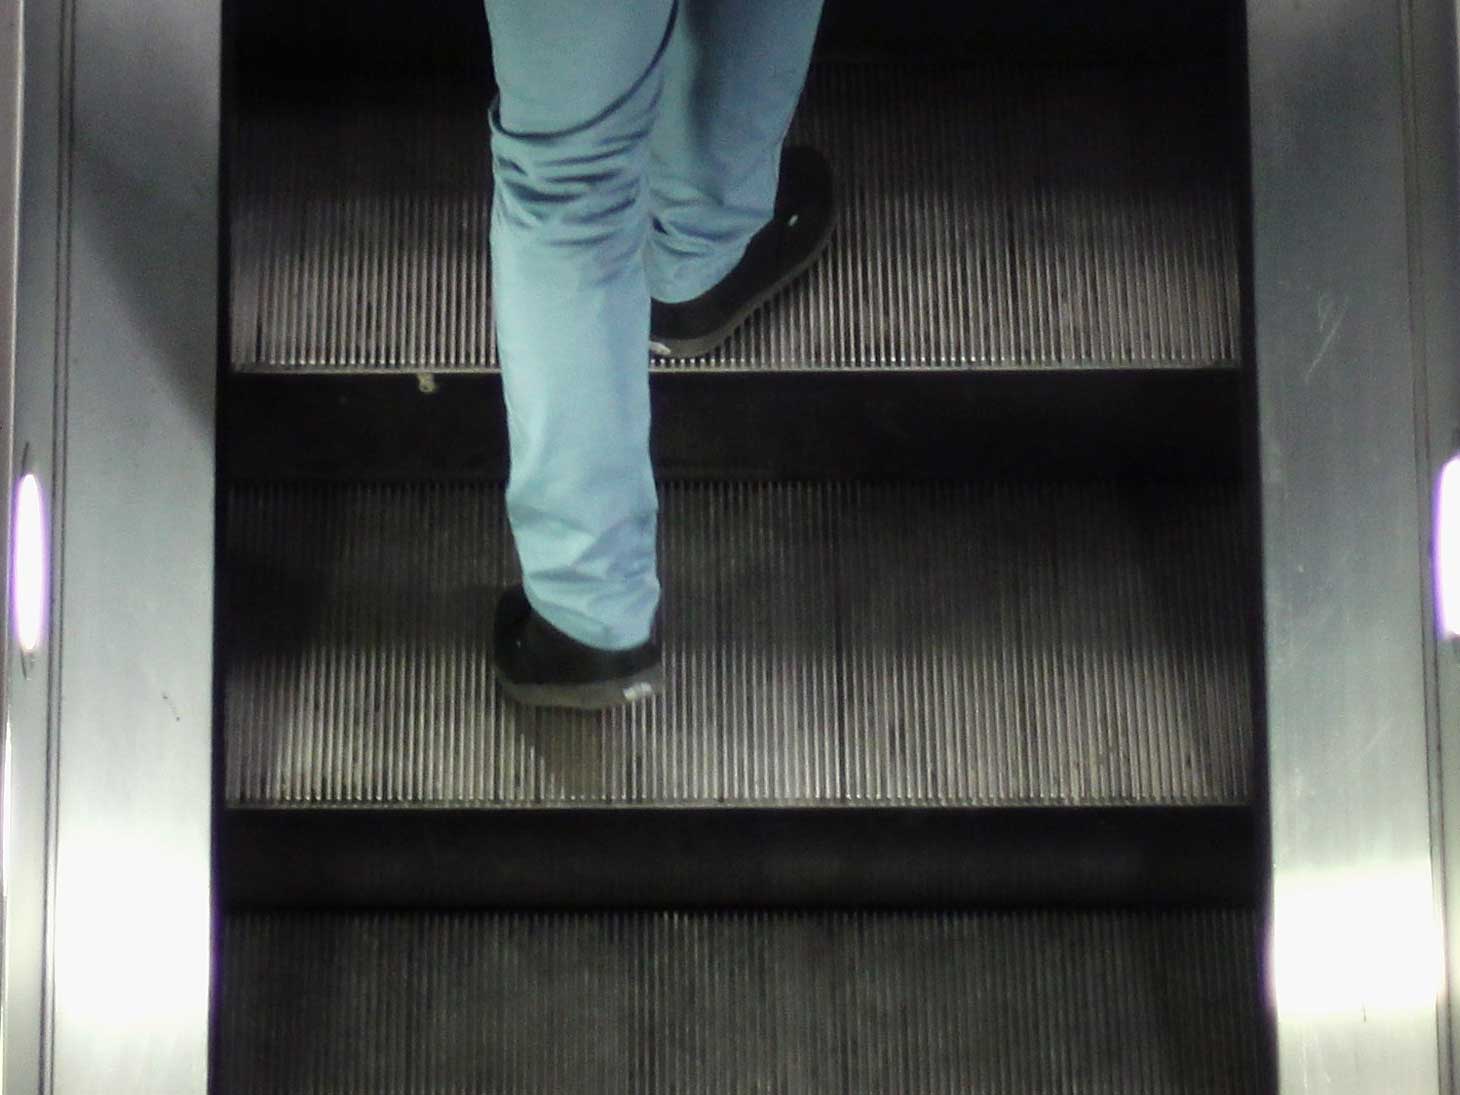 Staff at Holborn Tube station have been trialling 'standing only' on the station's escalators